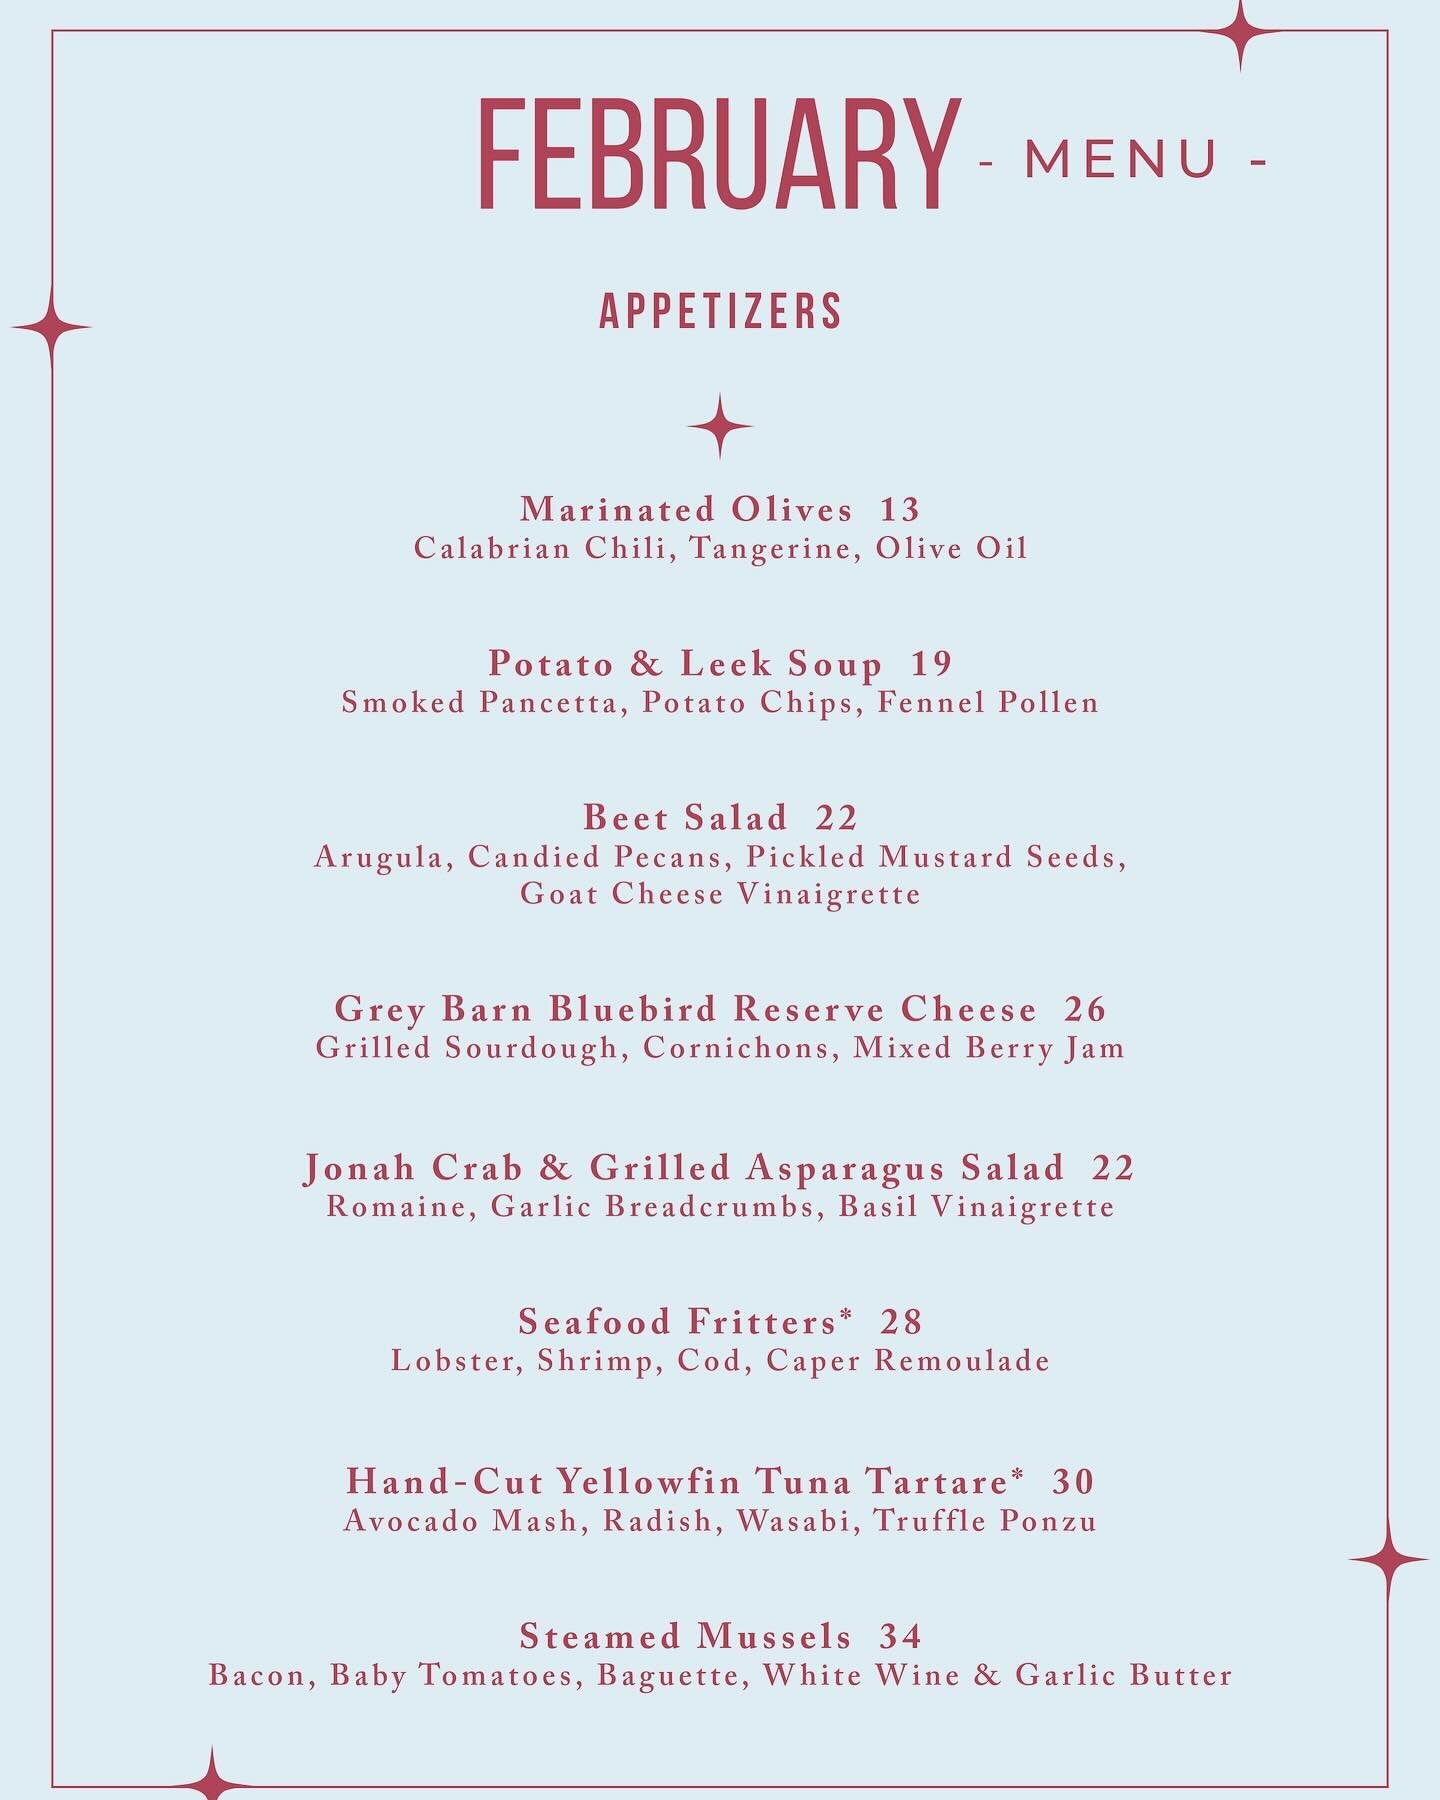 Happy February, Friends!! 
We&rsquo;re ✨REOPENING✨ on Feb 8th and can not wait to see all of you! 
(We have some delicious Valentine&rsquo;s Day specials too, so stay tuned!)

#reopening #werecomingback #special #menu #delicious #amazing #treats #mis